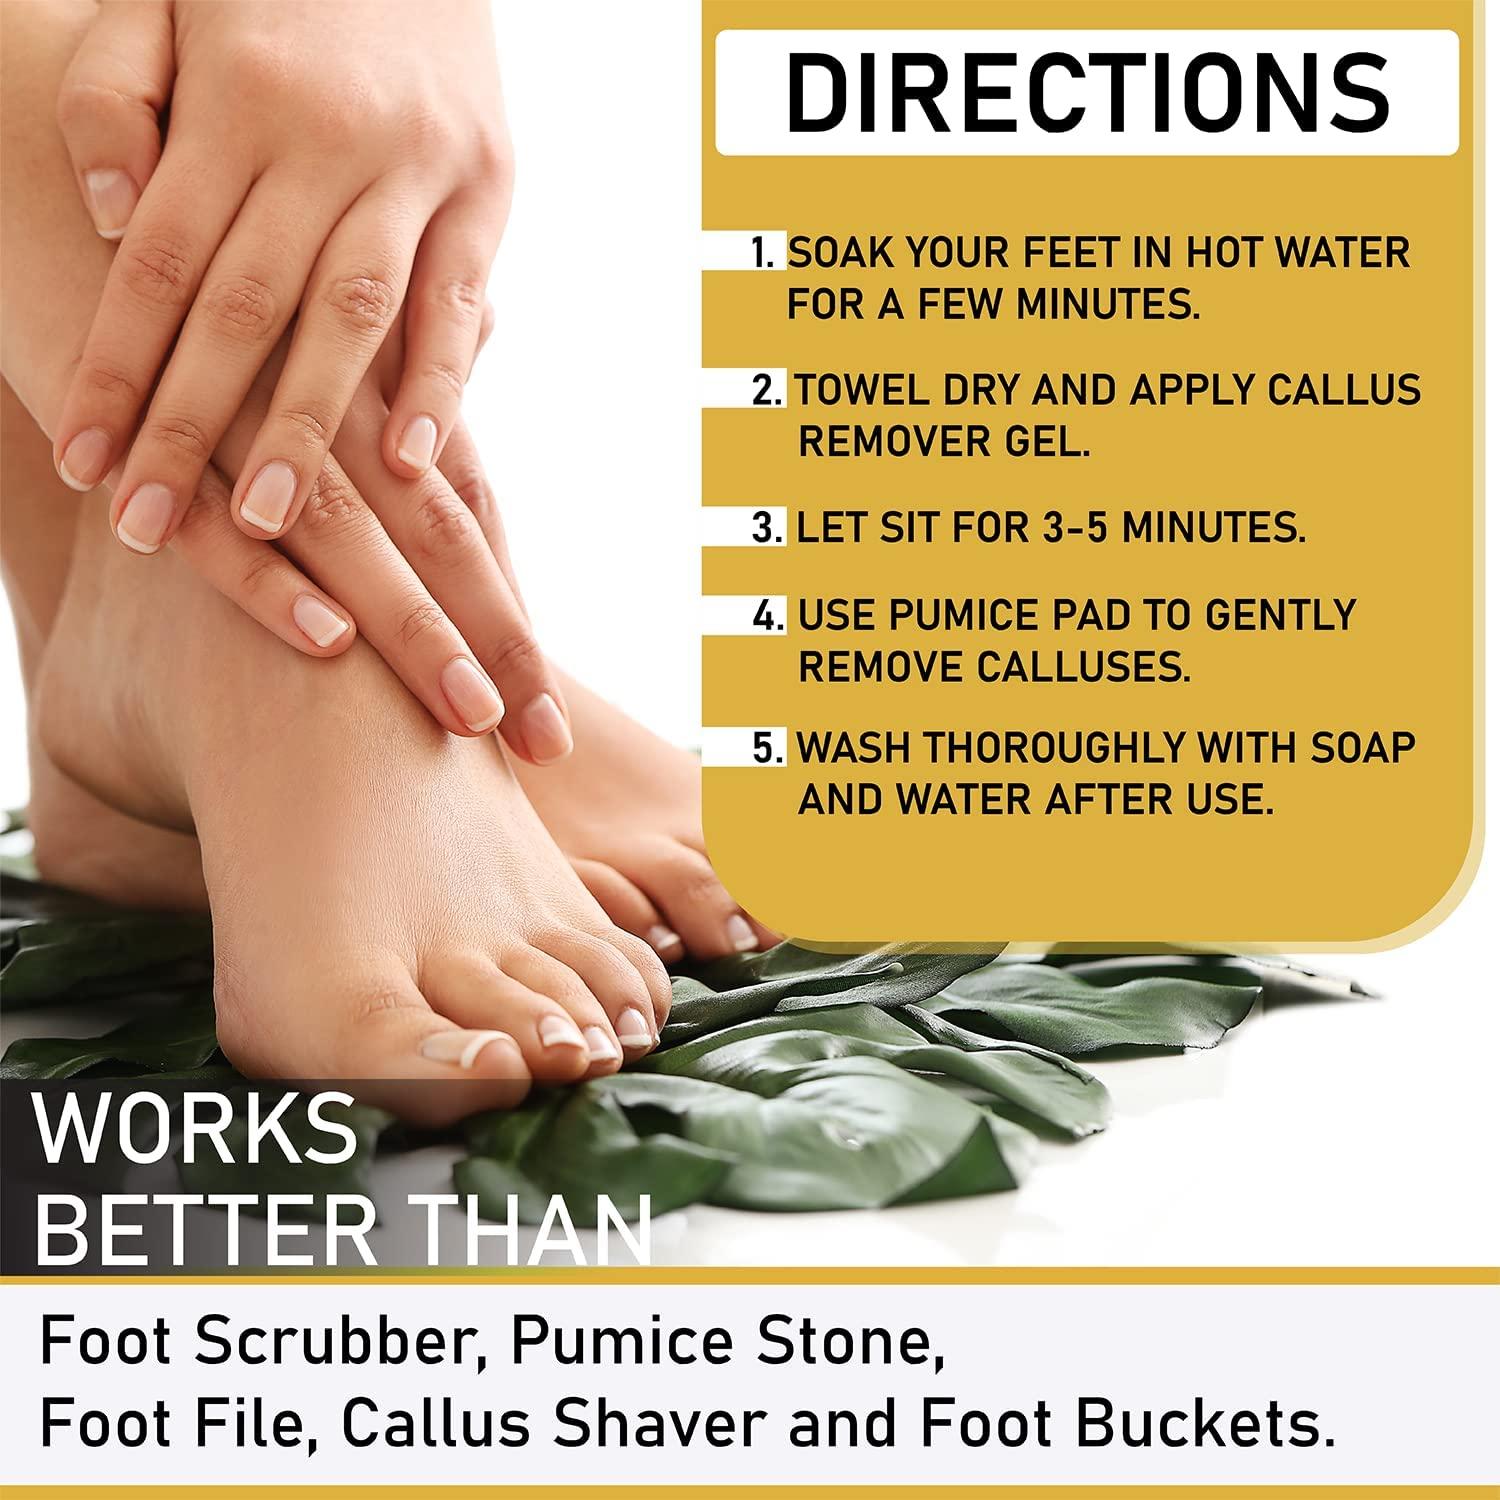 8oz Callus Remover gel for feet for a professional pedicure